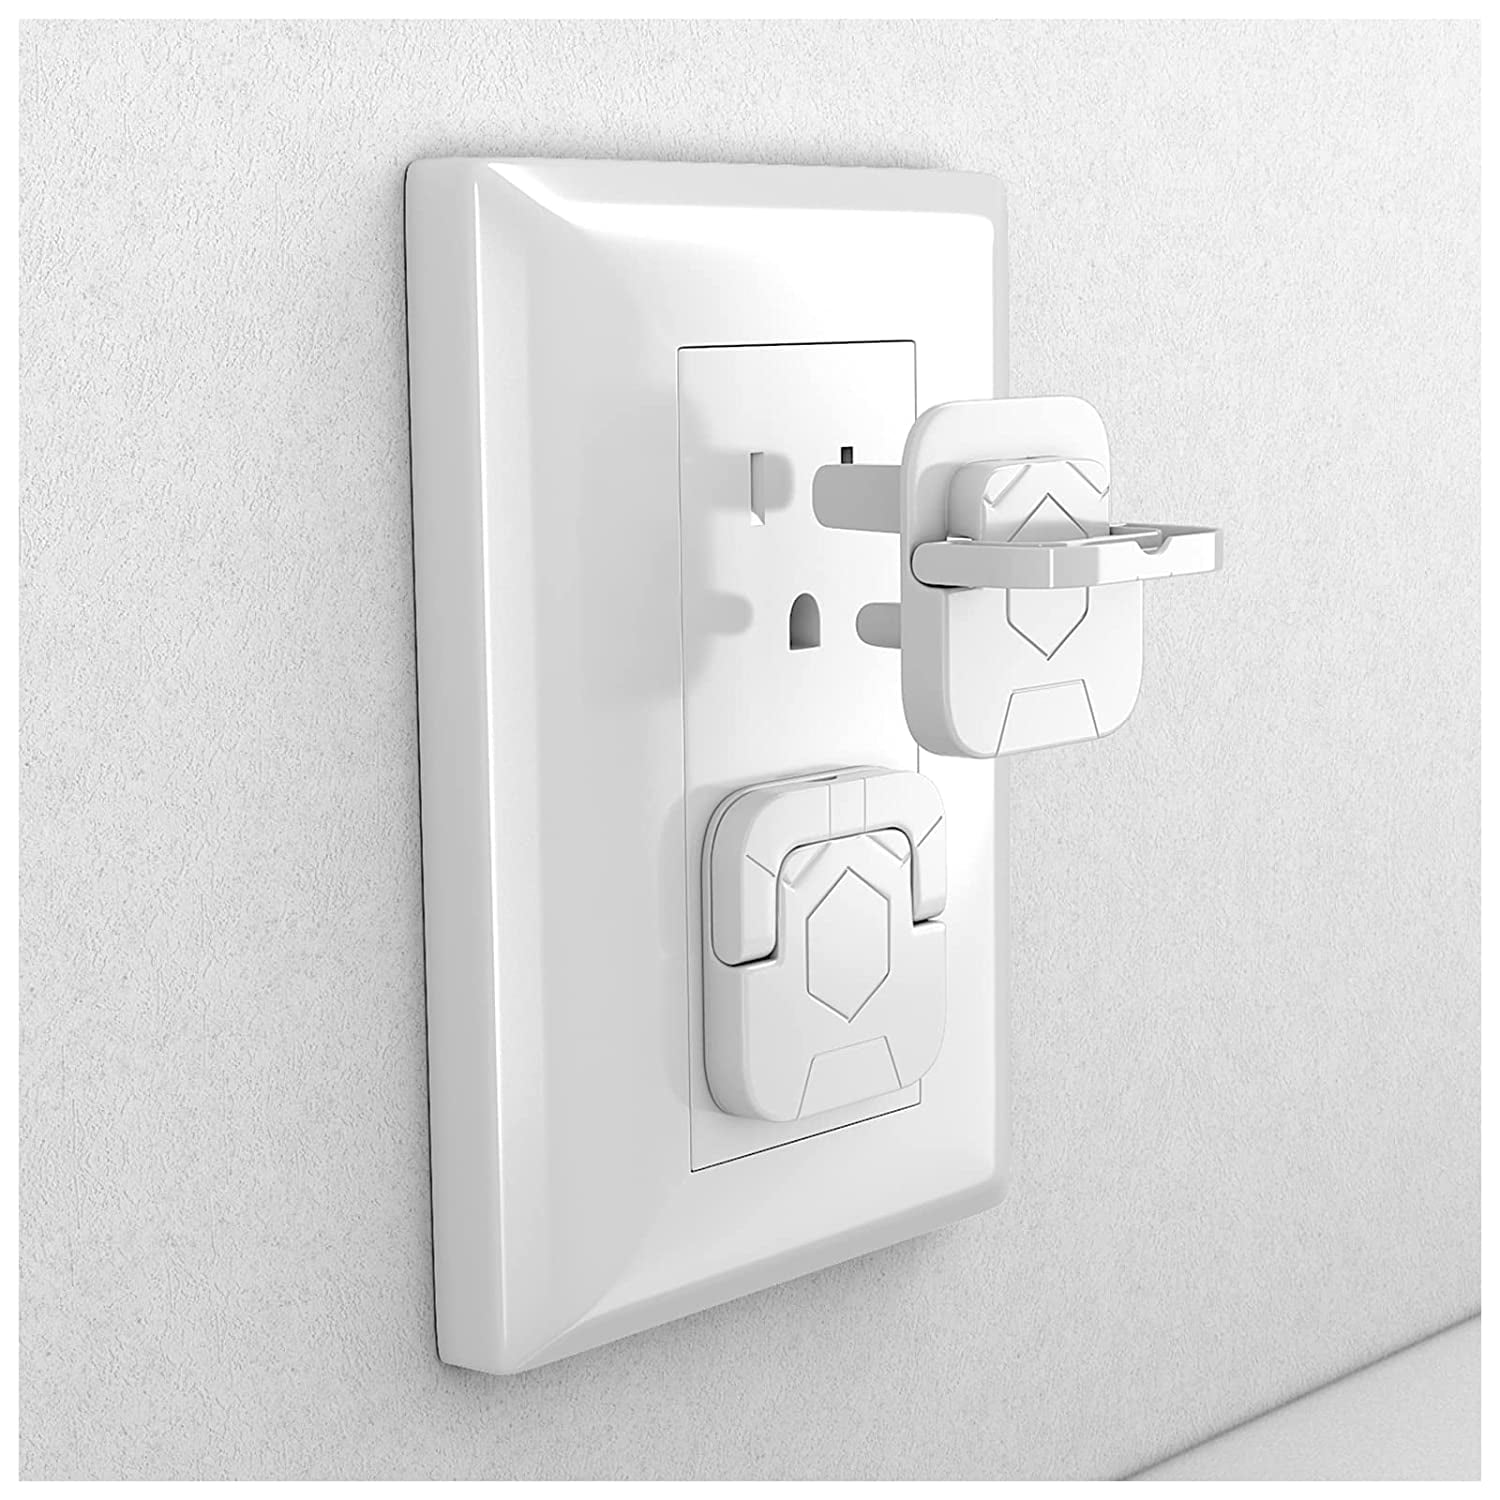 Easiest Outlet Covers for Babyproofing